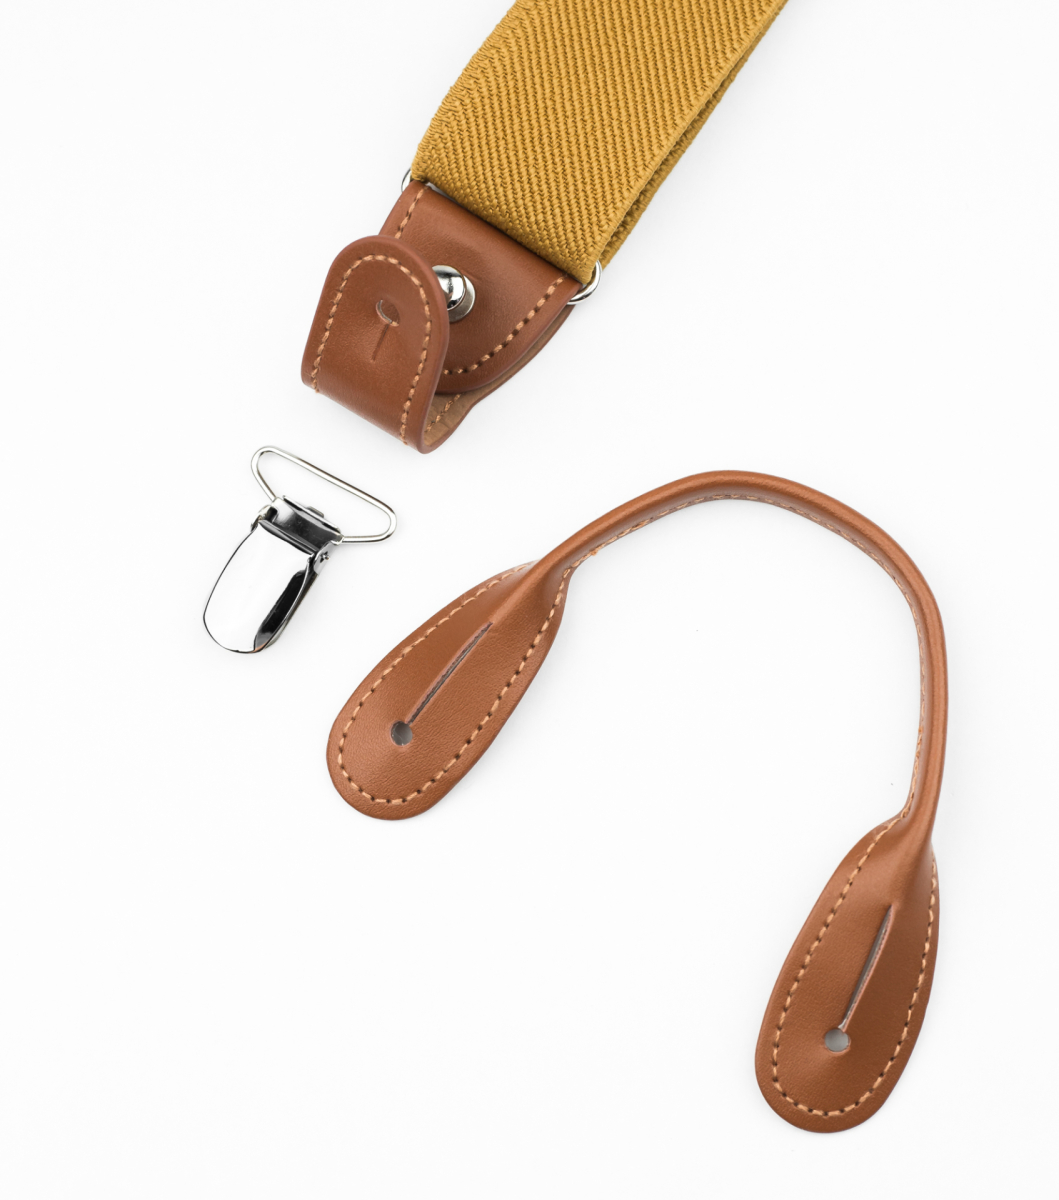 Mustard Yellow Suspenders for Men, Brown Leather Button Tab and